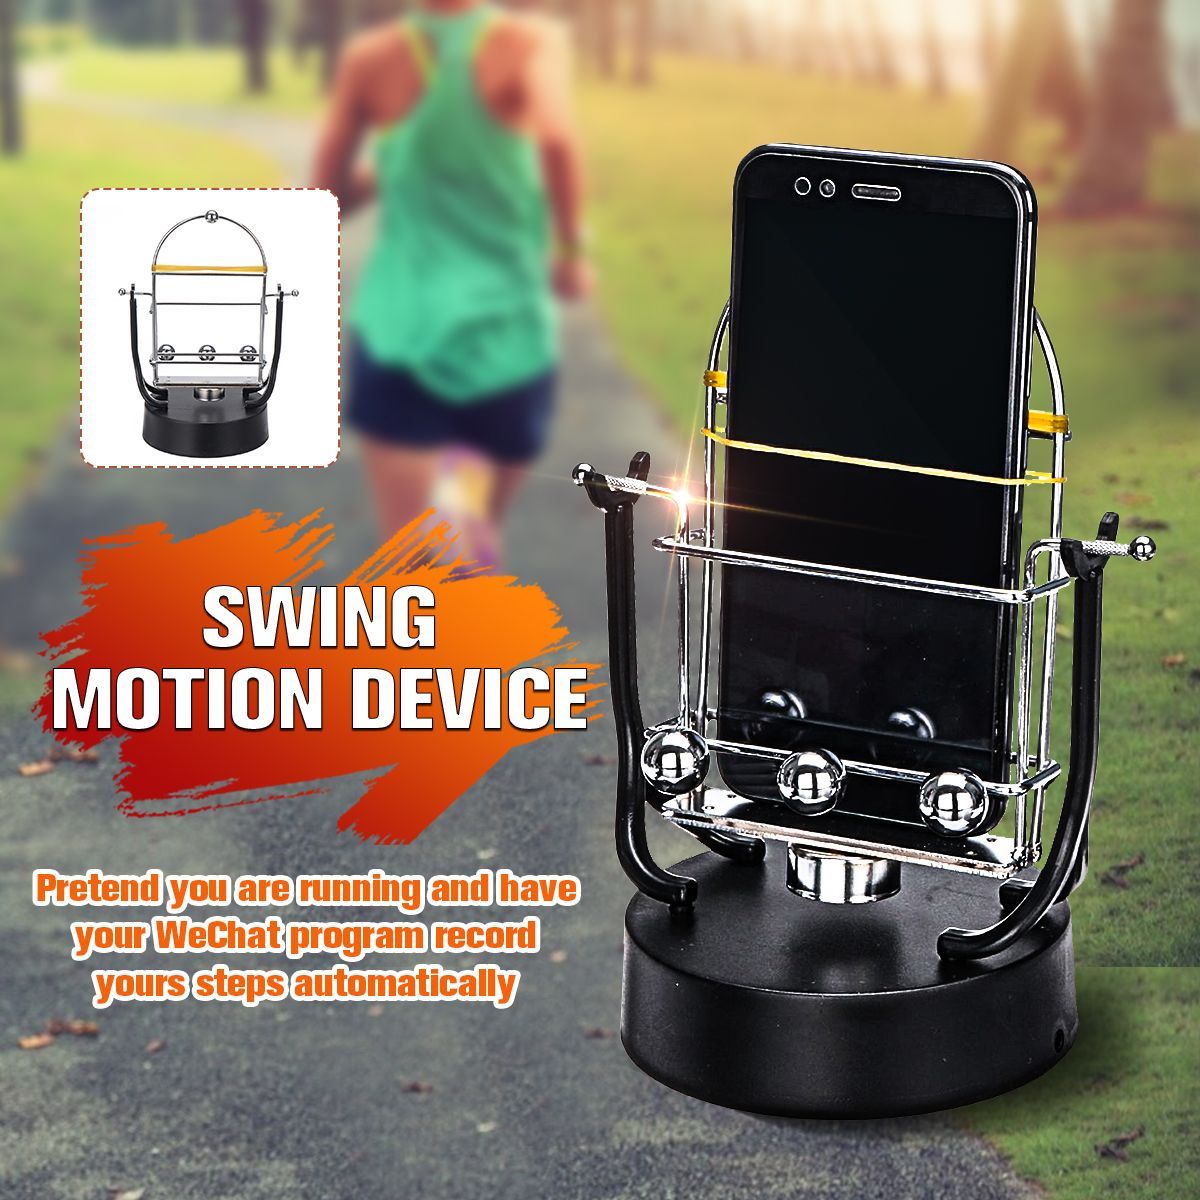 Automatic-Walking-Phone-Swing-Device-Pedometer-Motion-Brush-Step-Safety-Wiggler-1707051